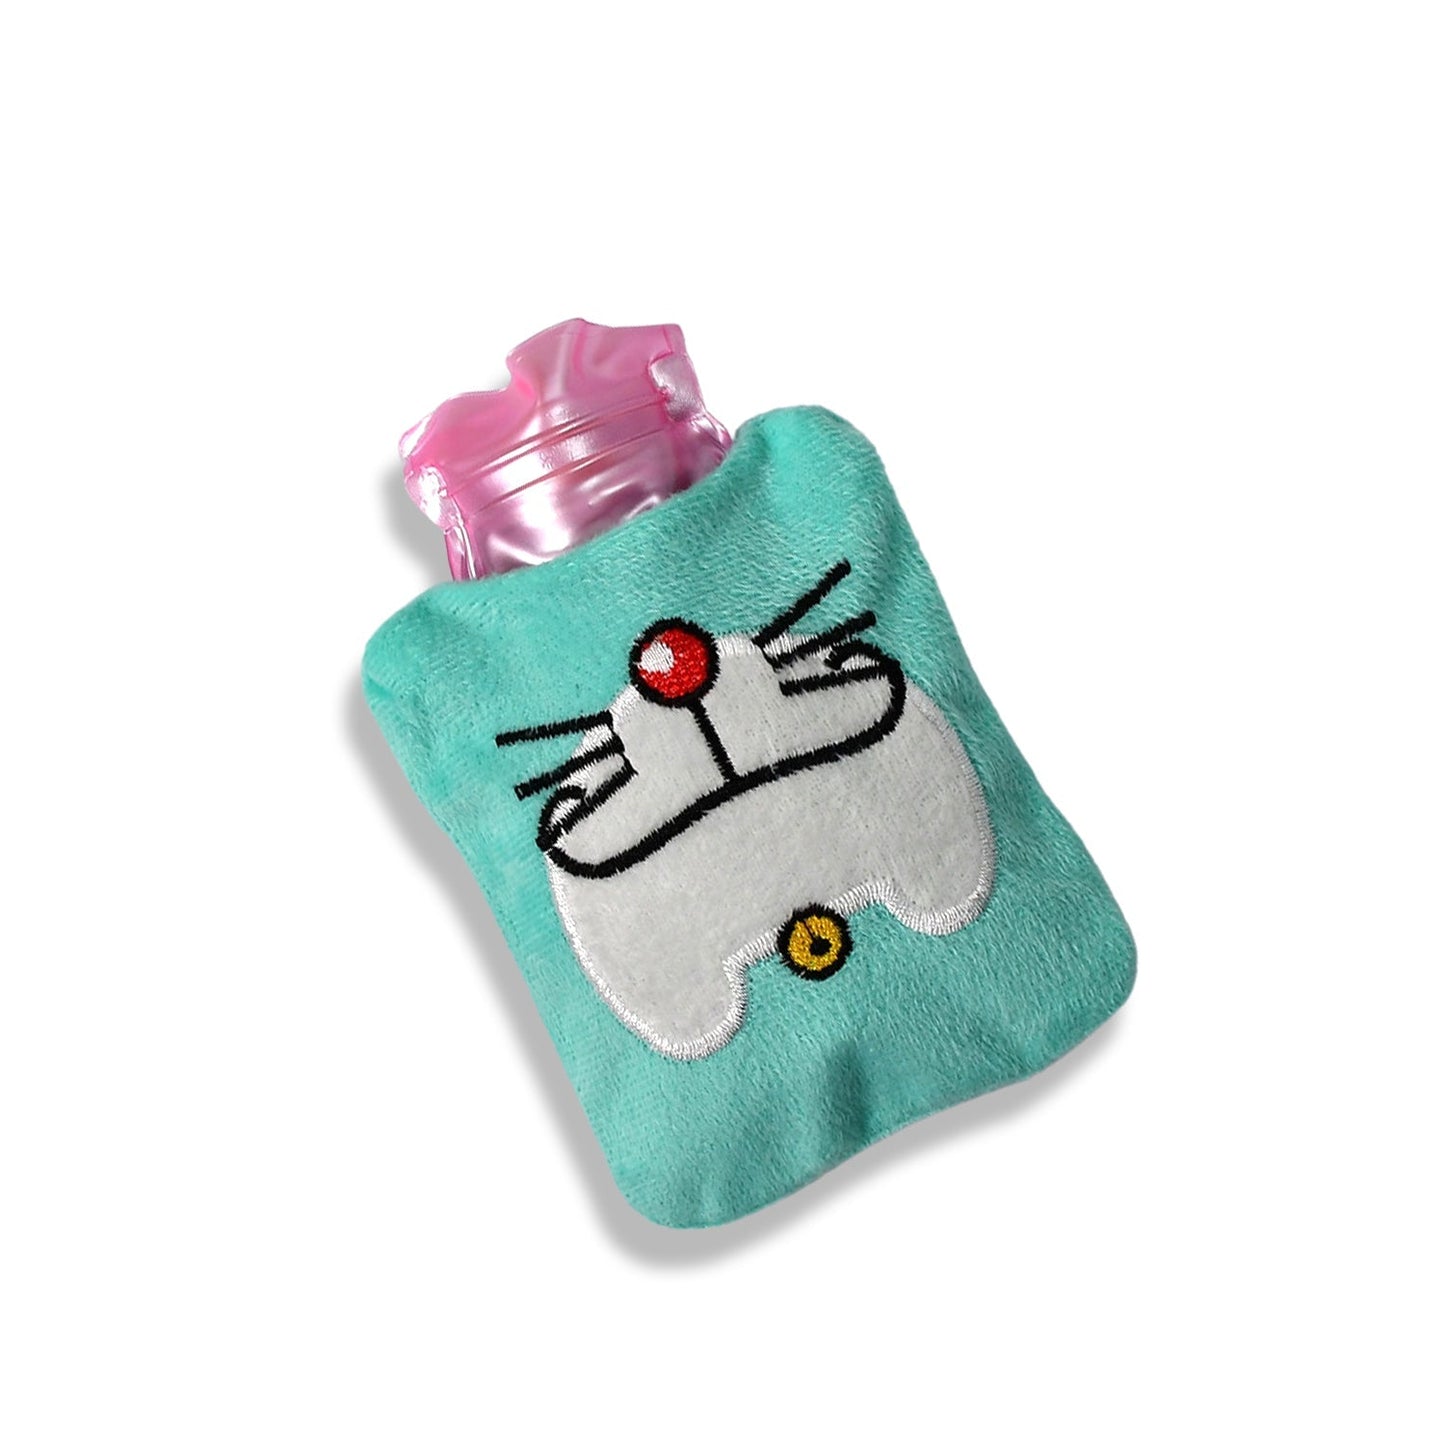 Doremon Cartoon small Hot Water Bag with Cover for Pain Relief, Neck, Shoulder Pain and Hand, Feet Warmer, Menstrual Cramps